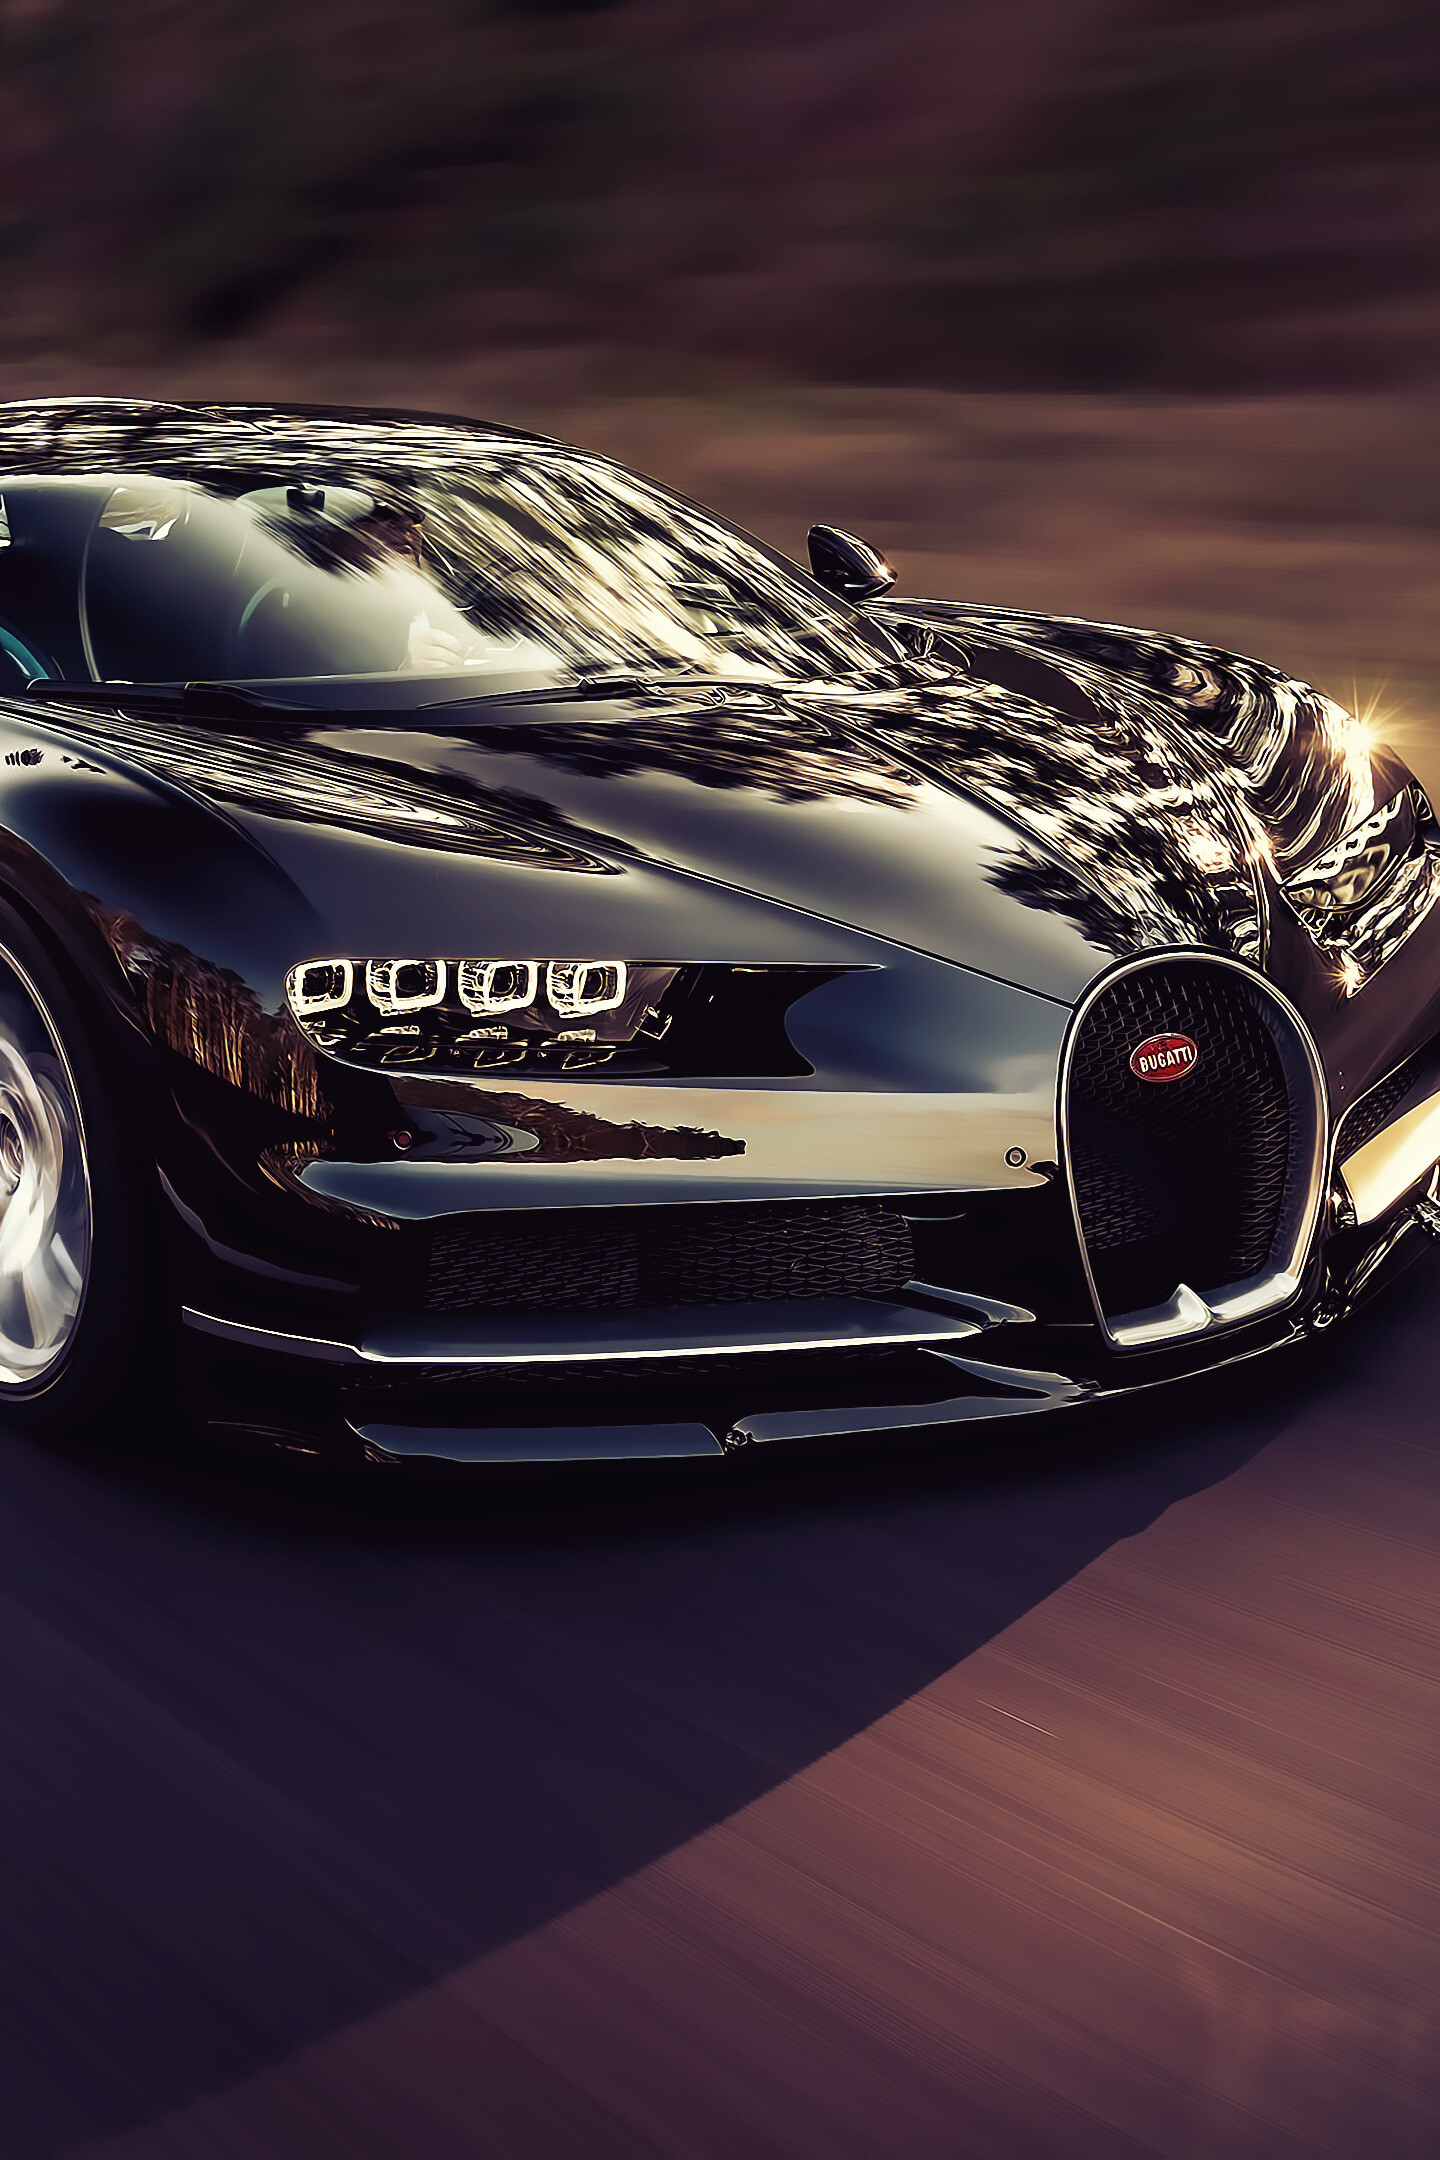 Bugatti: Luxury car, Chiron model, On road, The French automotive manufacturer. 1440x2160 HD Wallpaper.